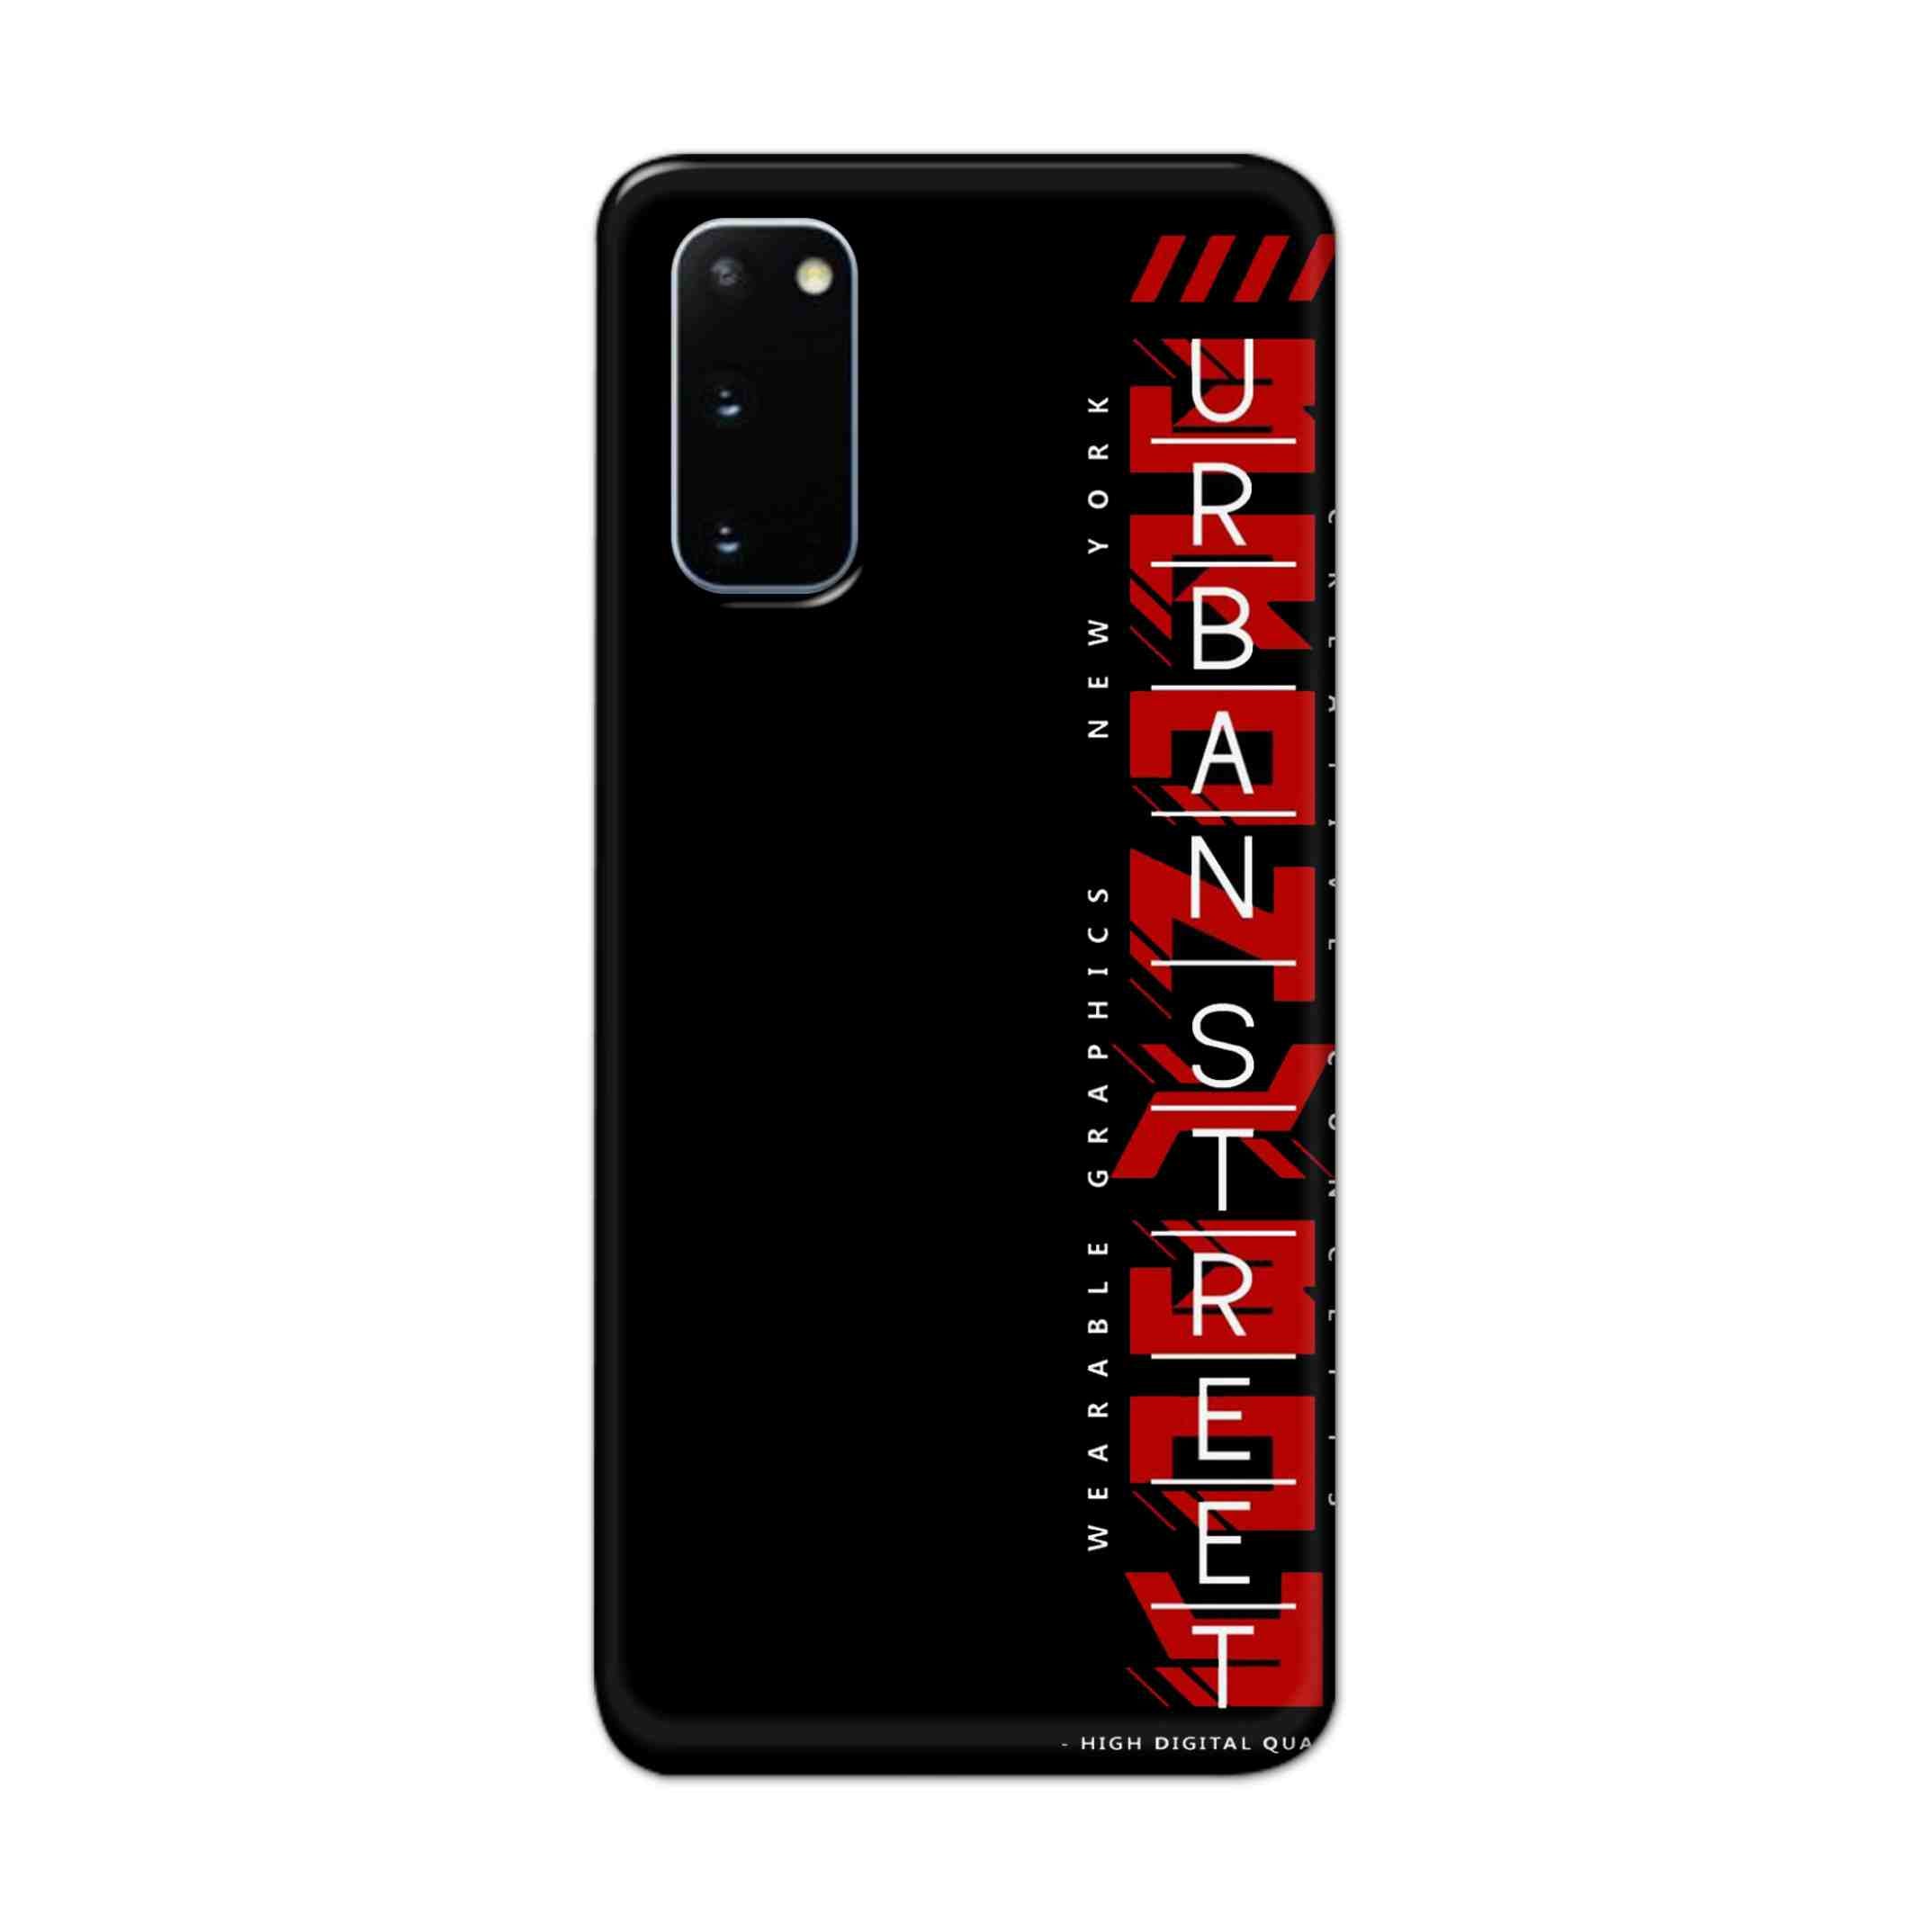 Buy Urban Street Hard Back Mobile Phone Case Cover For Samsung Galaxy S20 Online